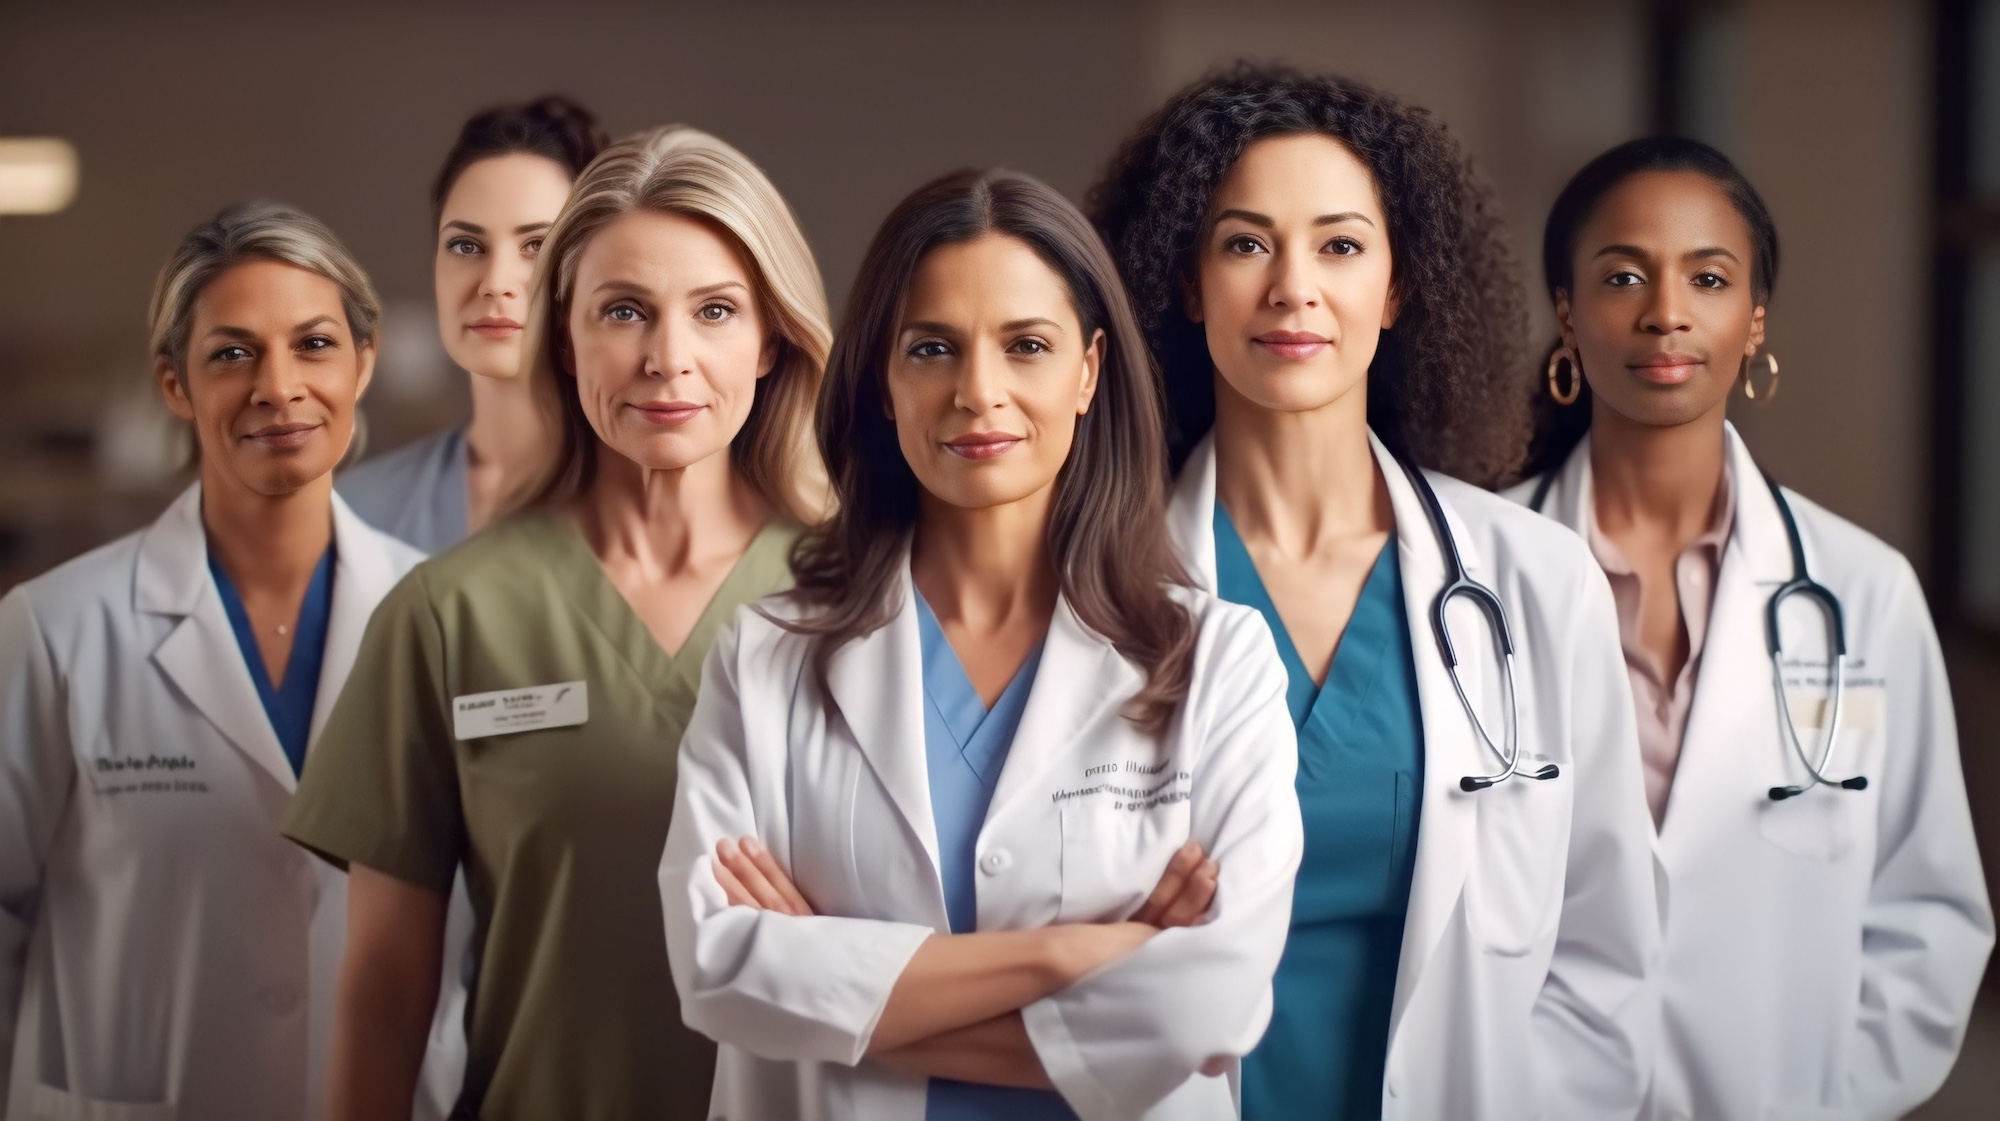 Portrait group of diverse Female Physicians Doctors together